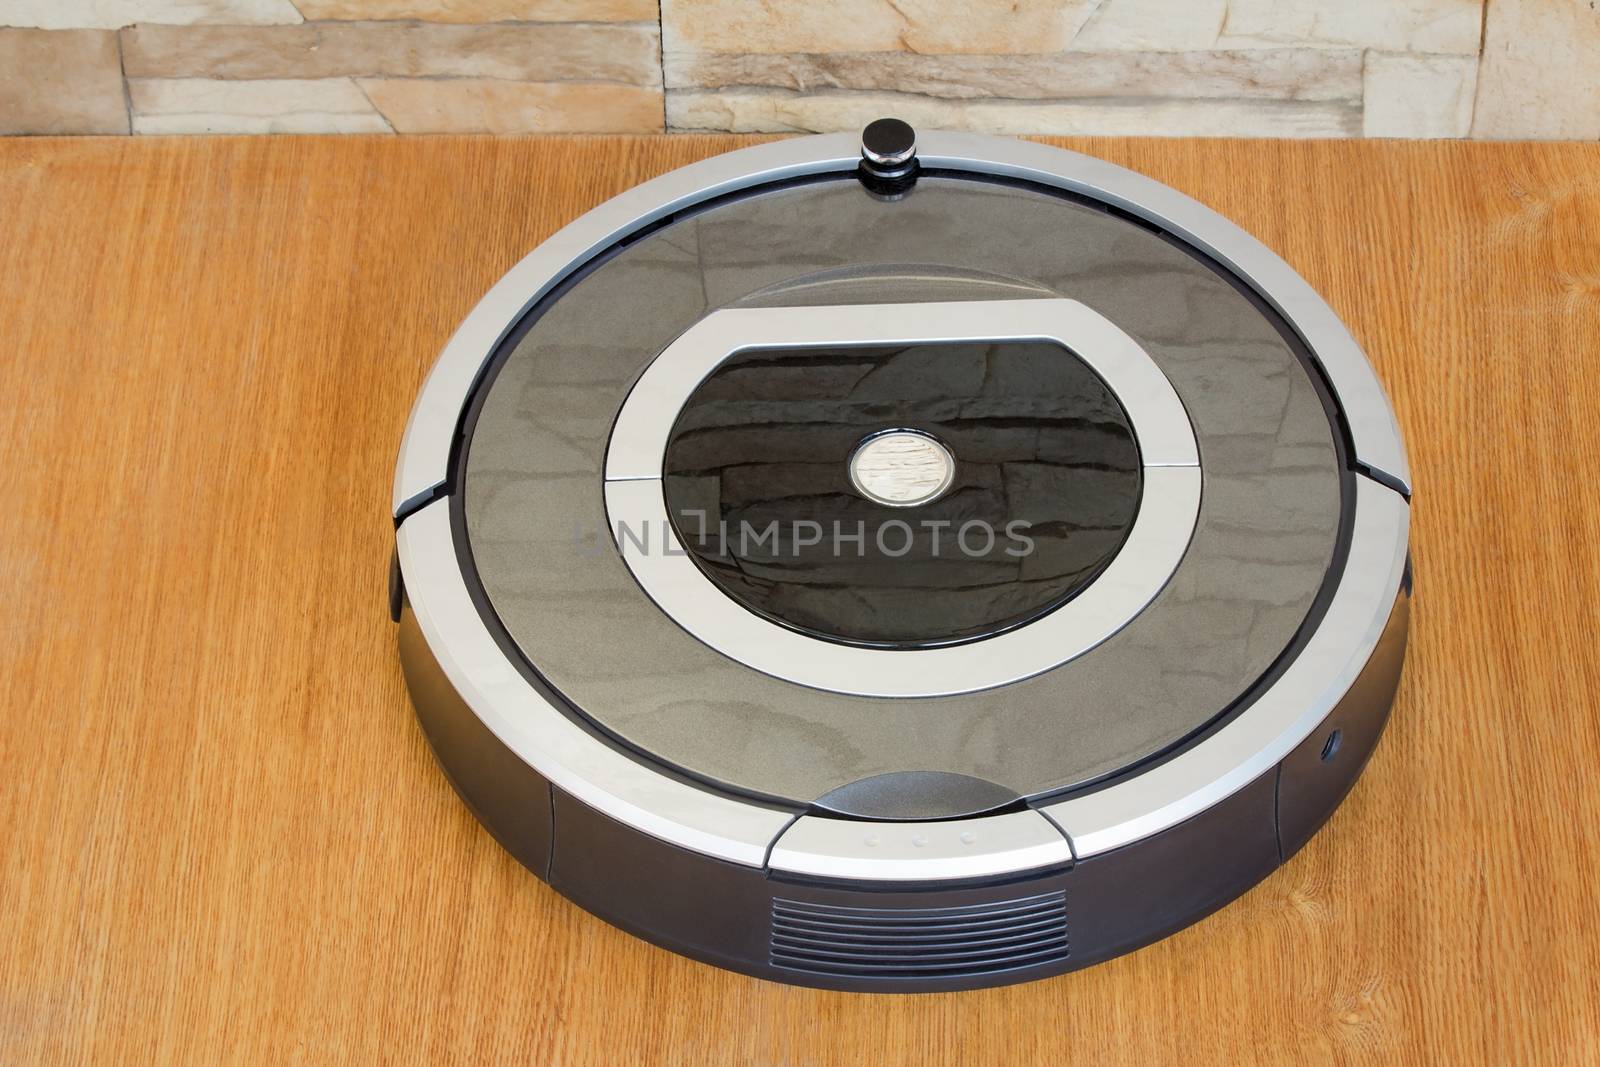 The automated robot vacuum cleaner of a roundish form, can make cleaning in hard-to-reach spots.